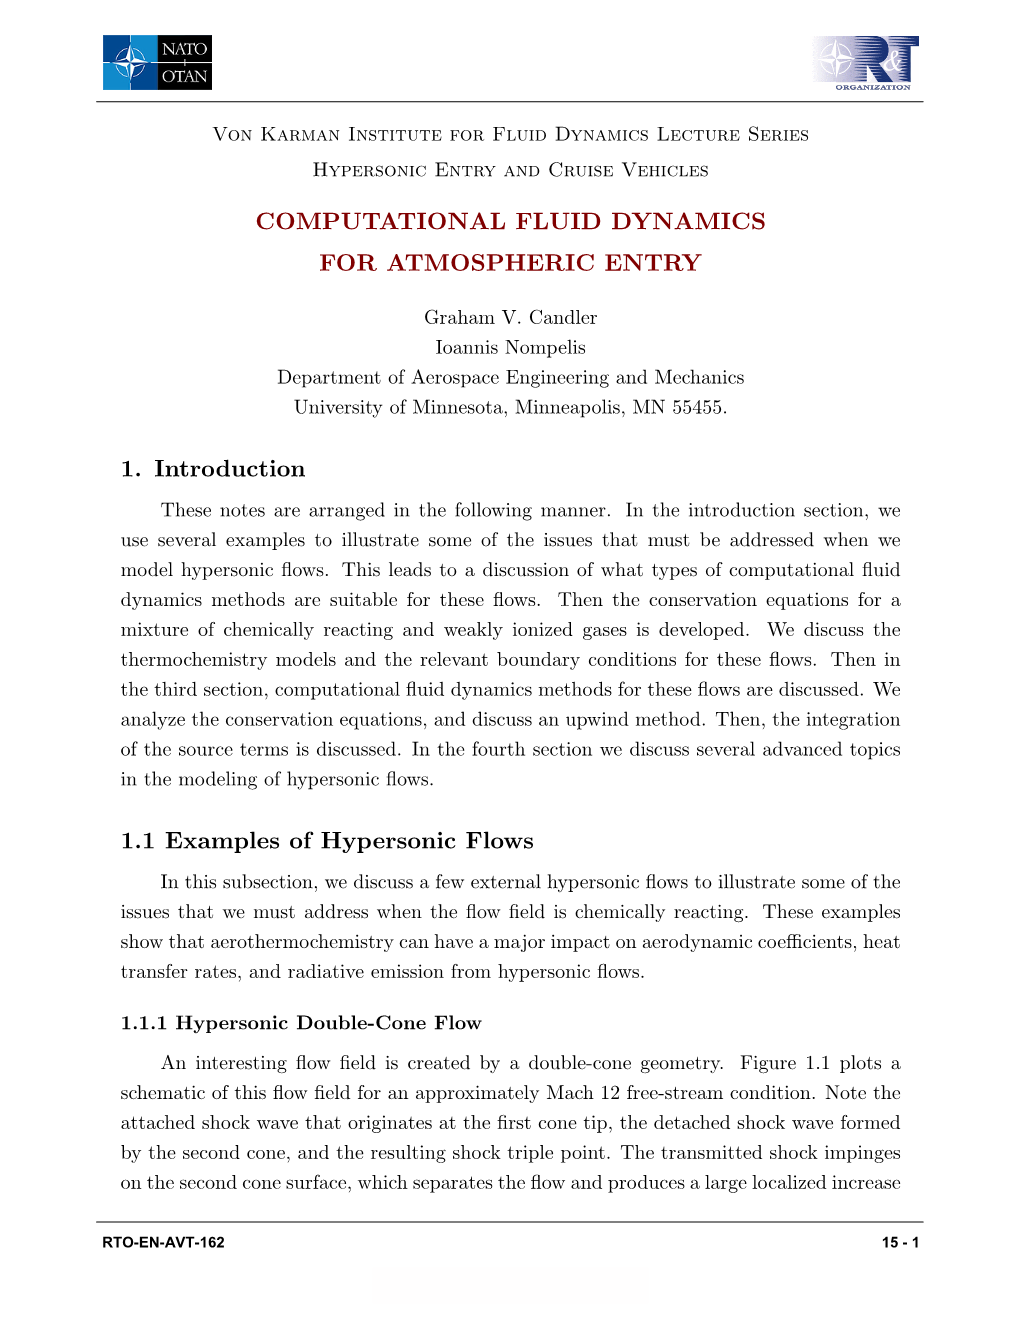 COMPUTATIONAL FLUID DYNAMICS for ATMOSPHERIC ENTRY 1. Introduction 1.1 Examples of Hypersonic Flows